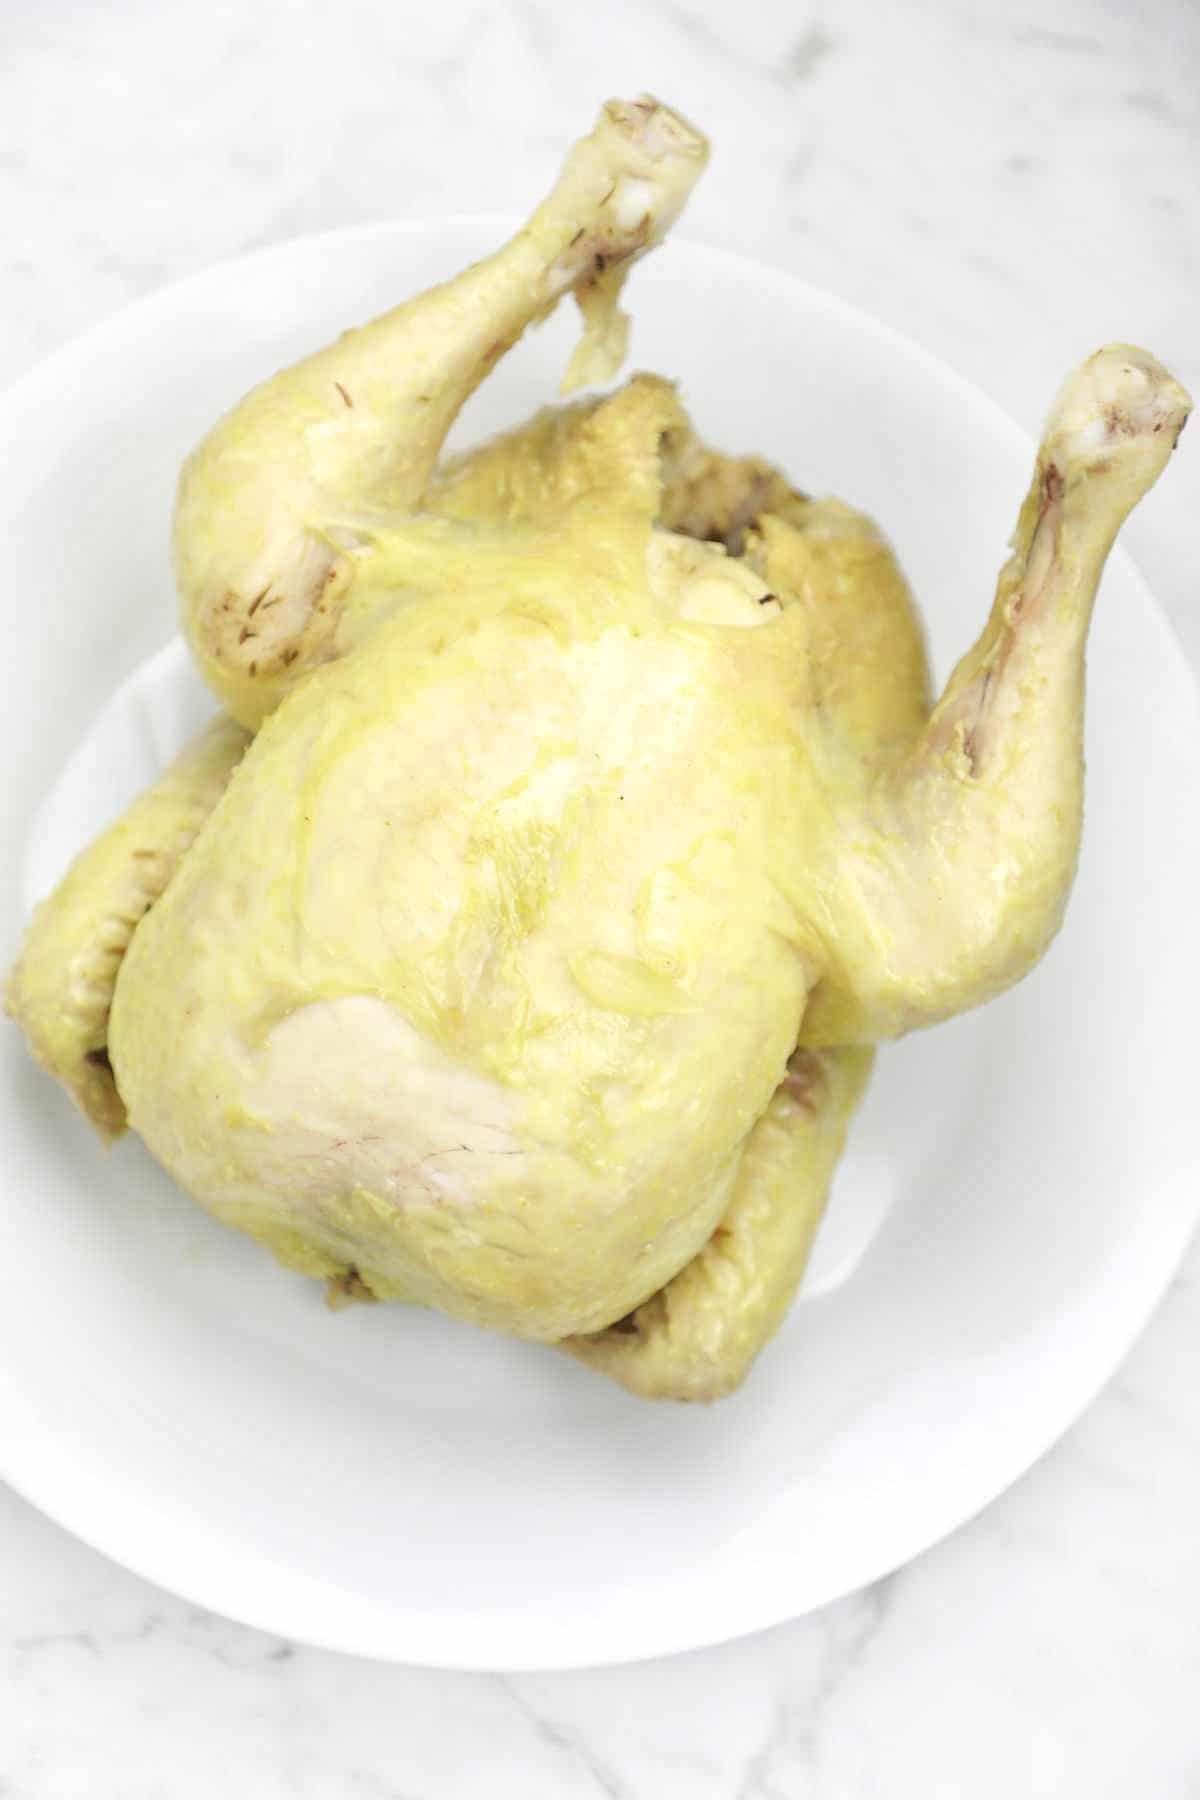 boiled whole chicken on a plate.